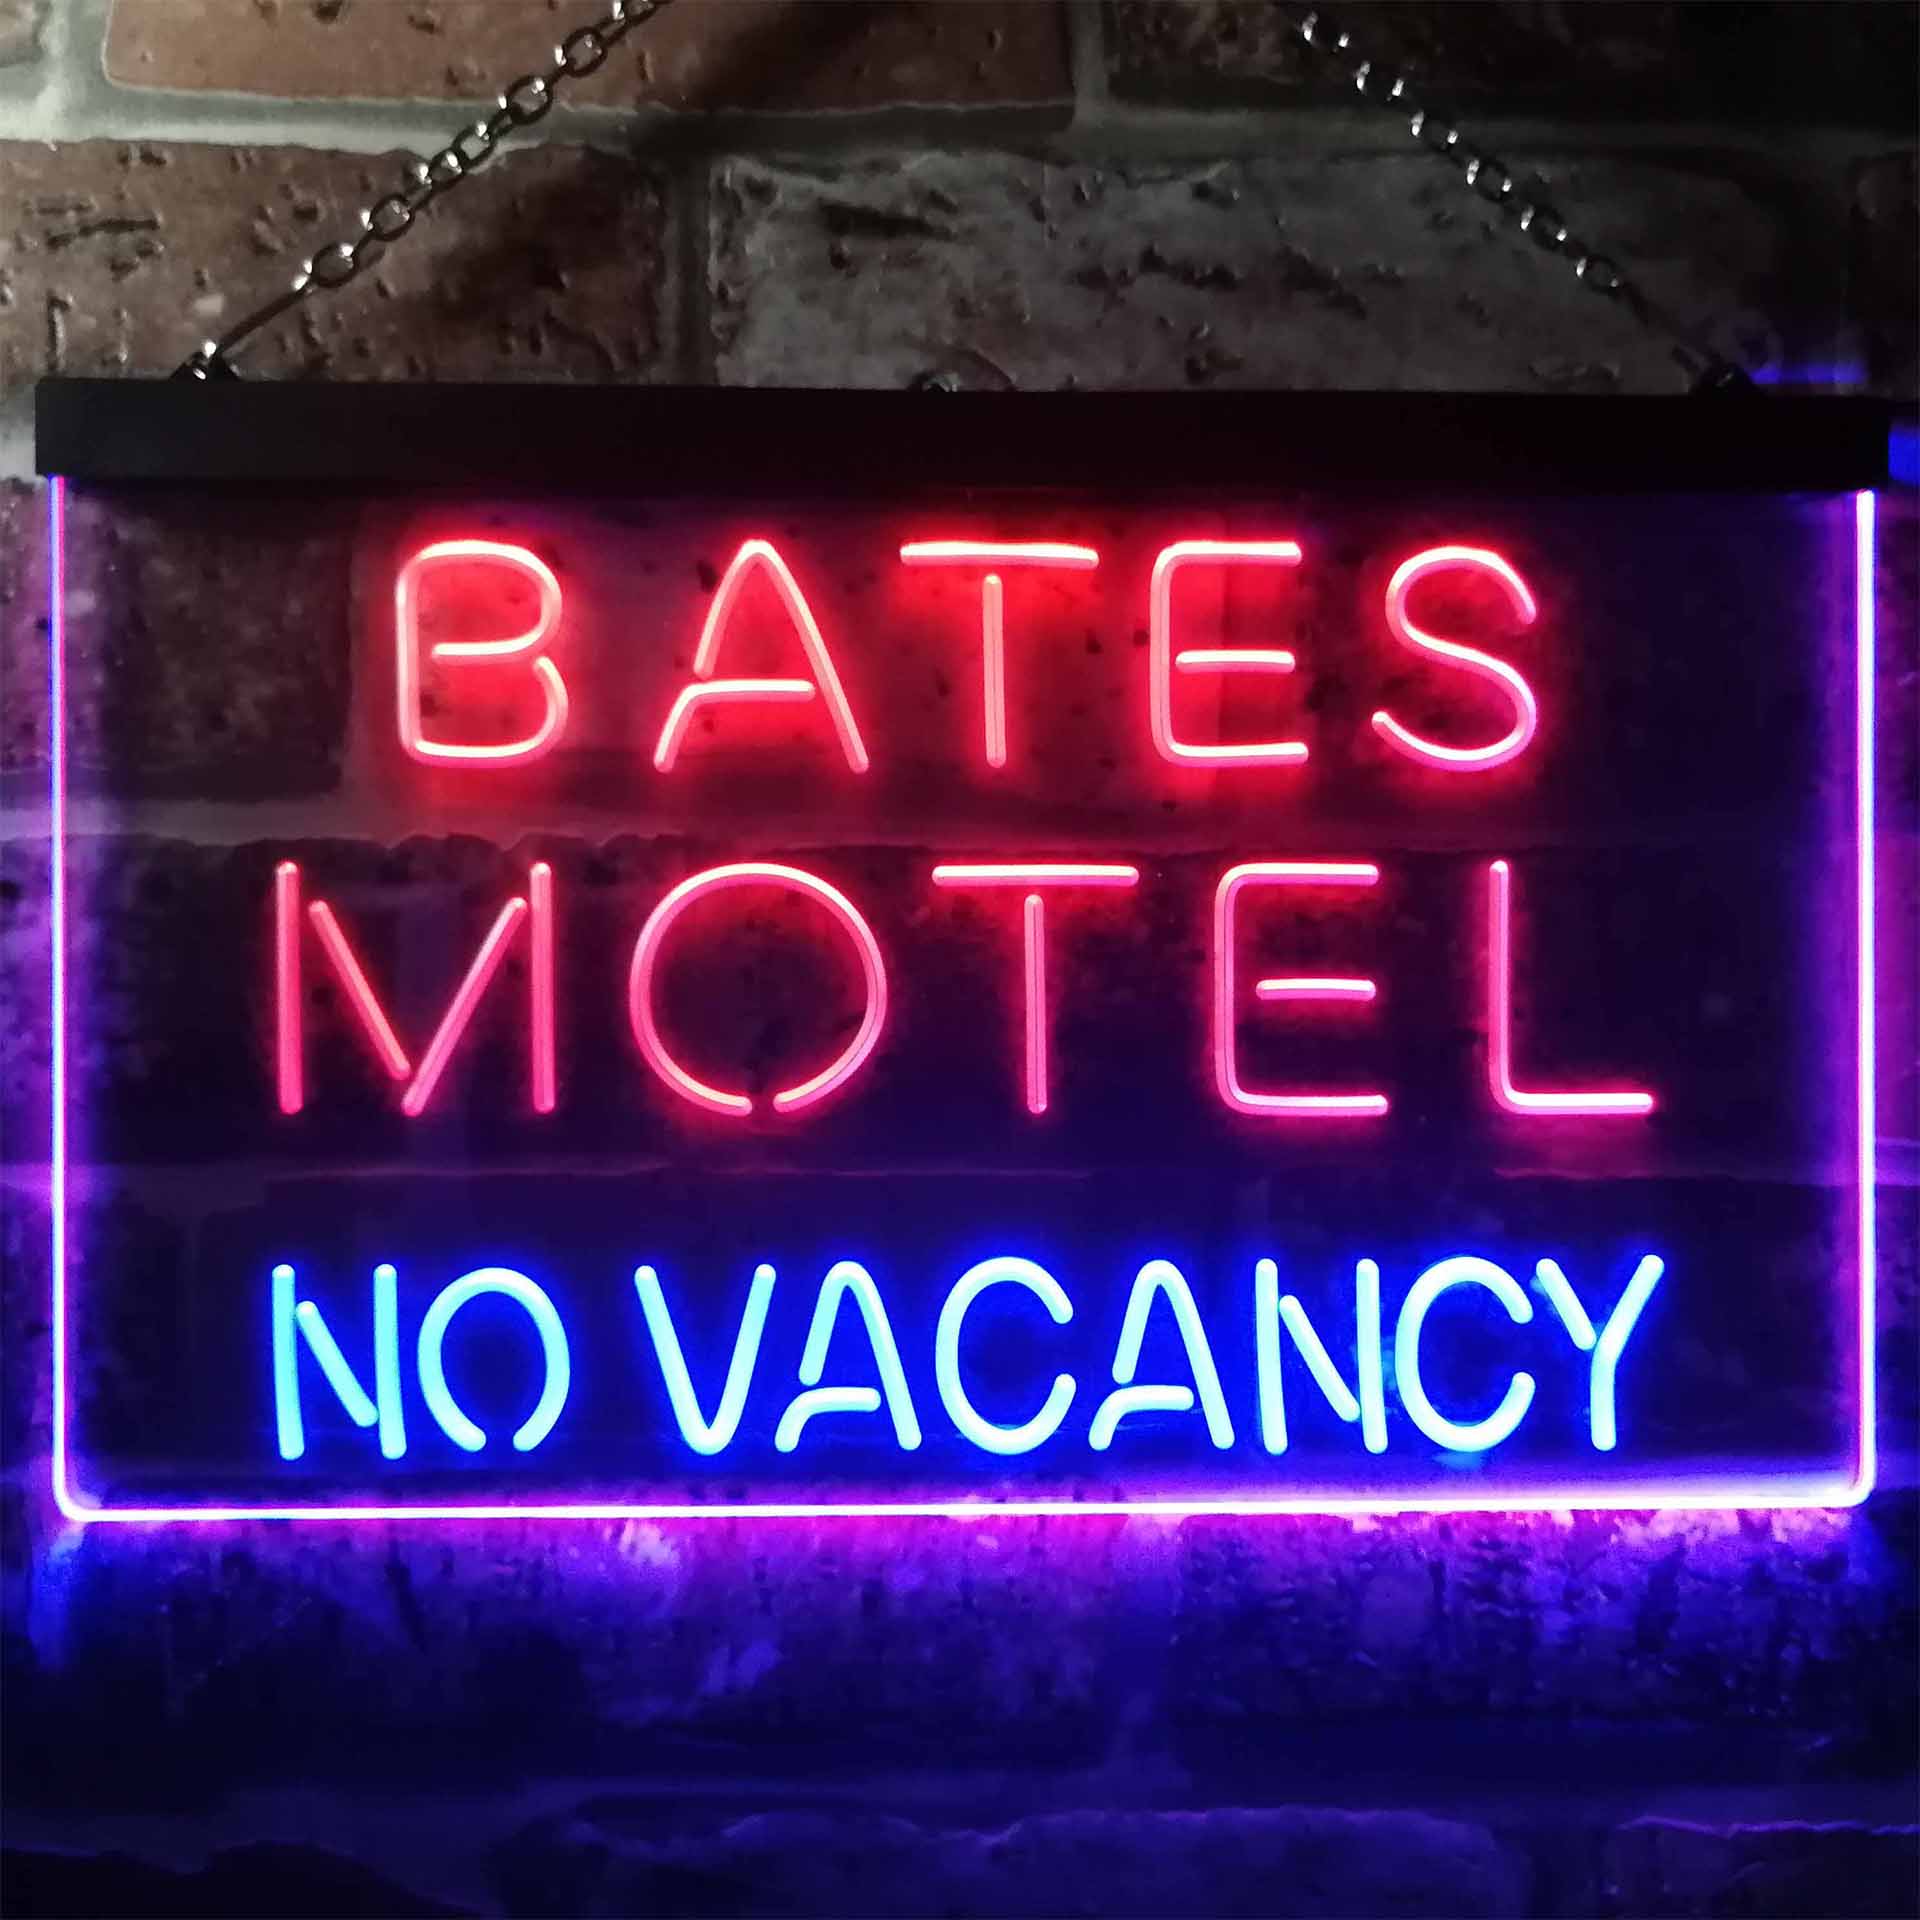 Bates Motel No Vacancy Neon Sign Lamp Light Beer Bar With Dimmer 